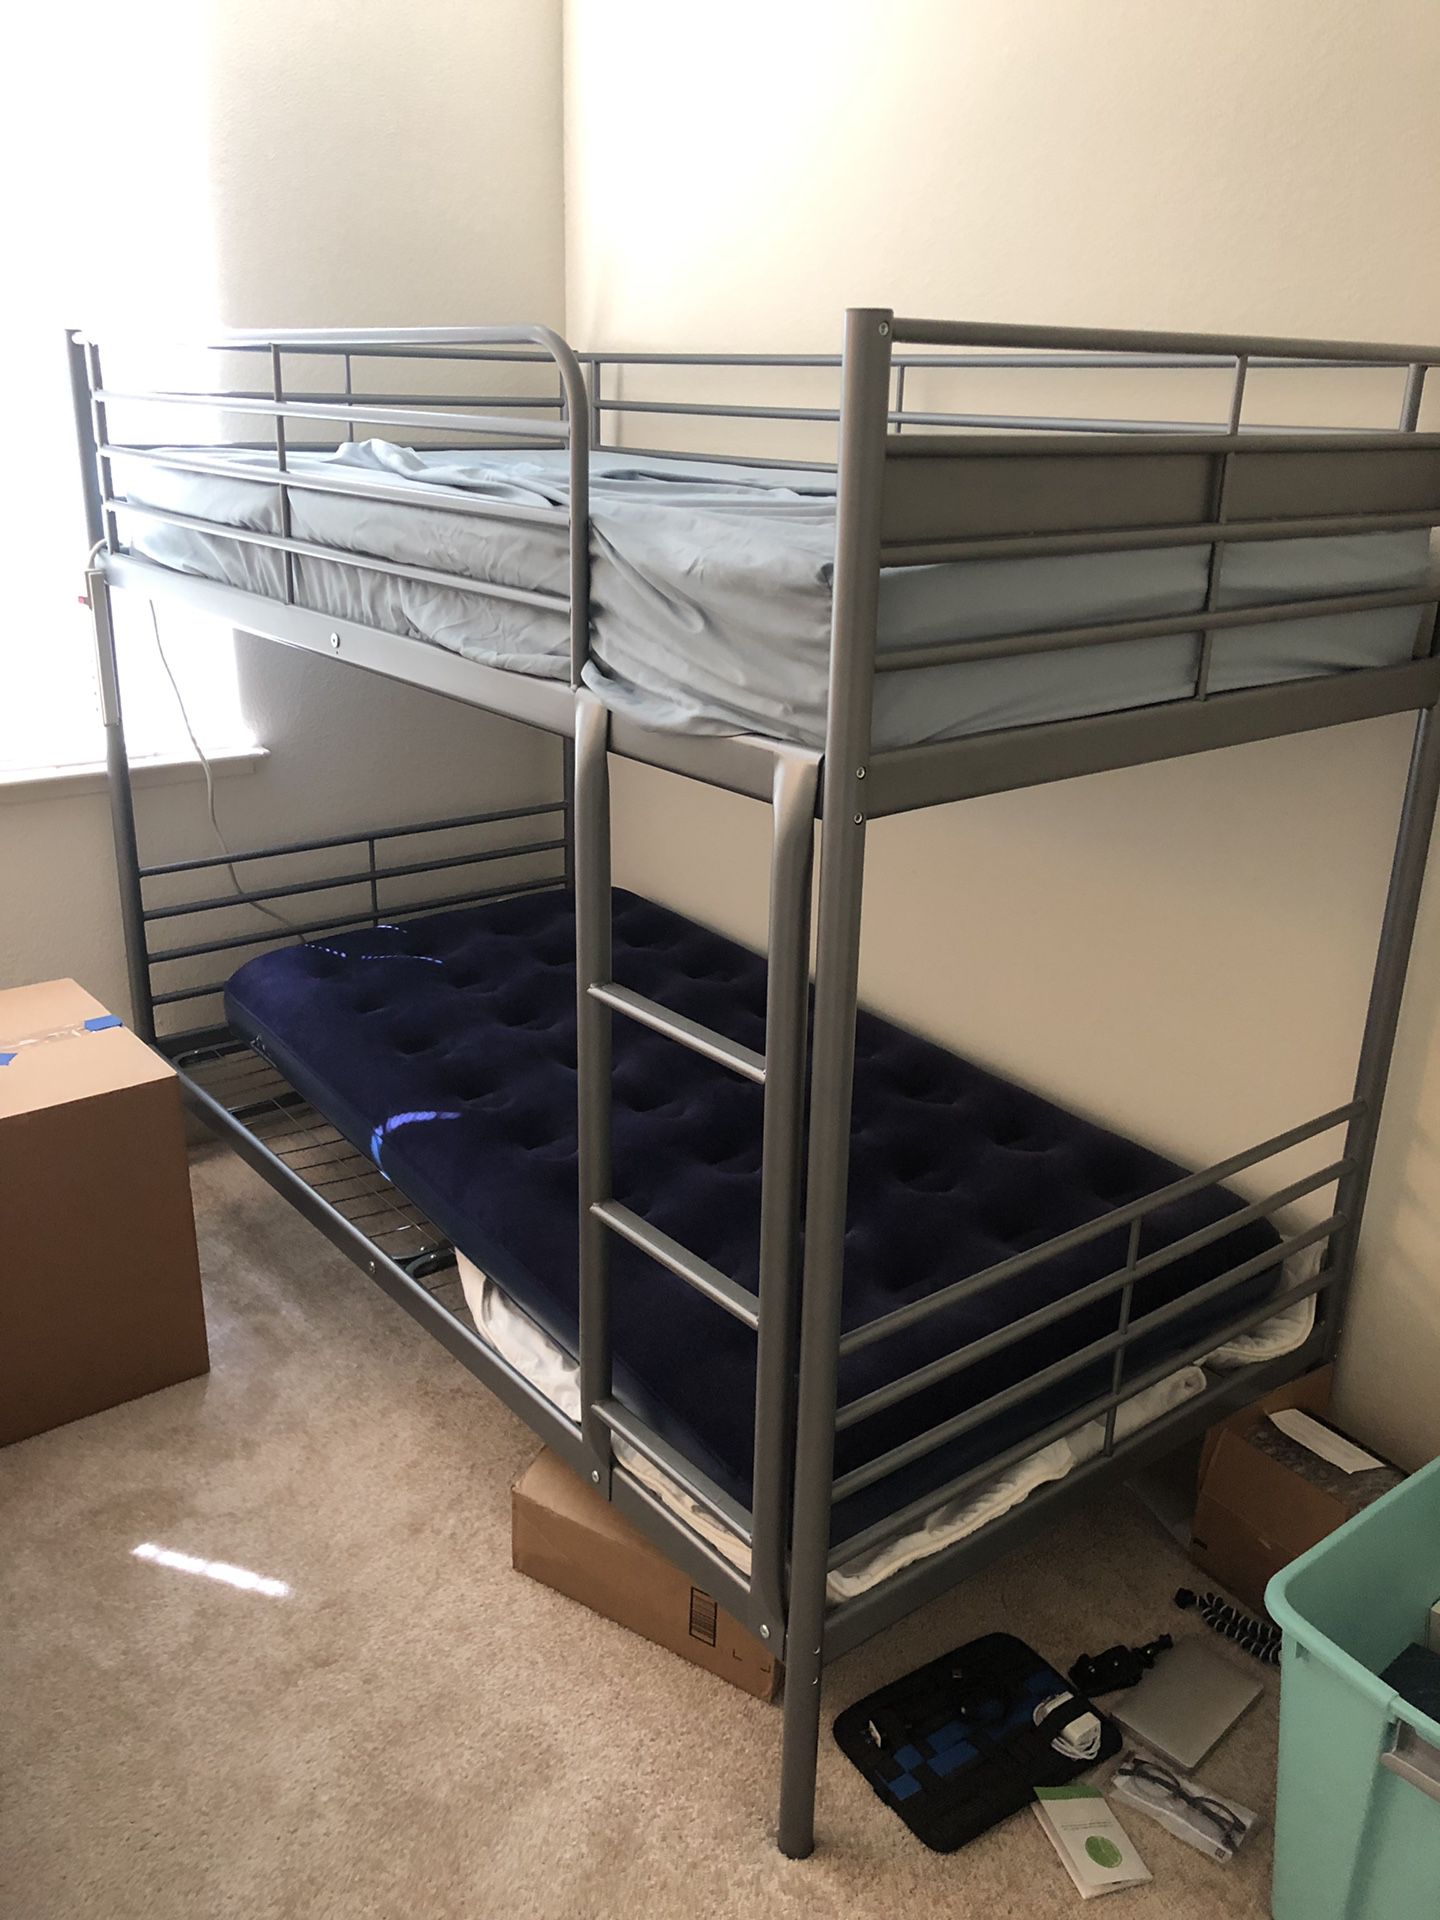 SVÄRTA Bunk bed frame with one twin mattress and one air mattress